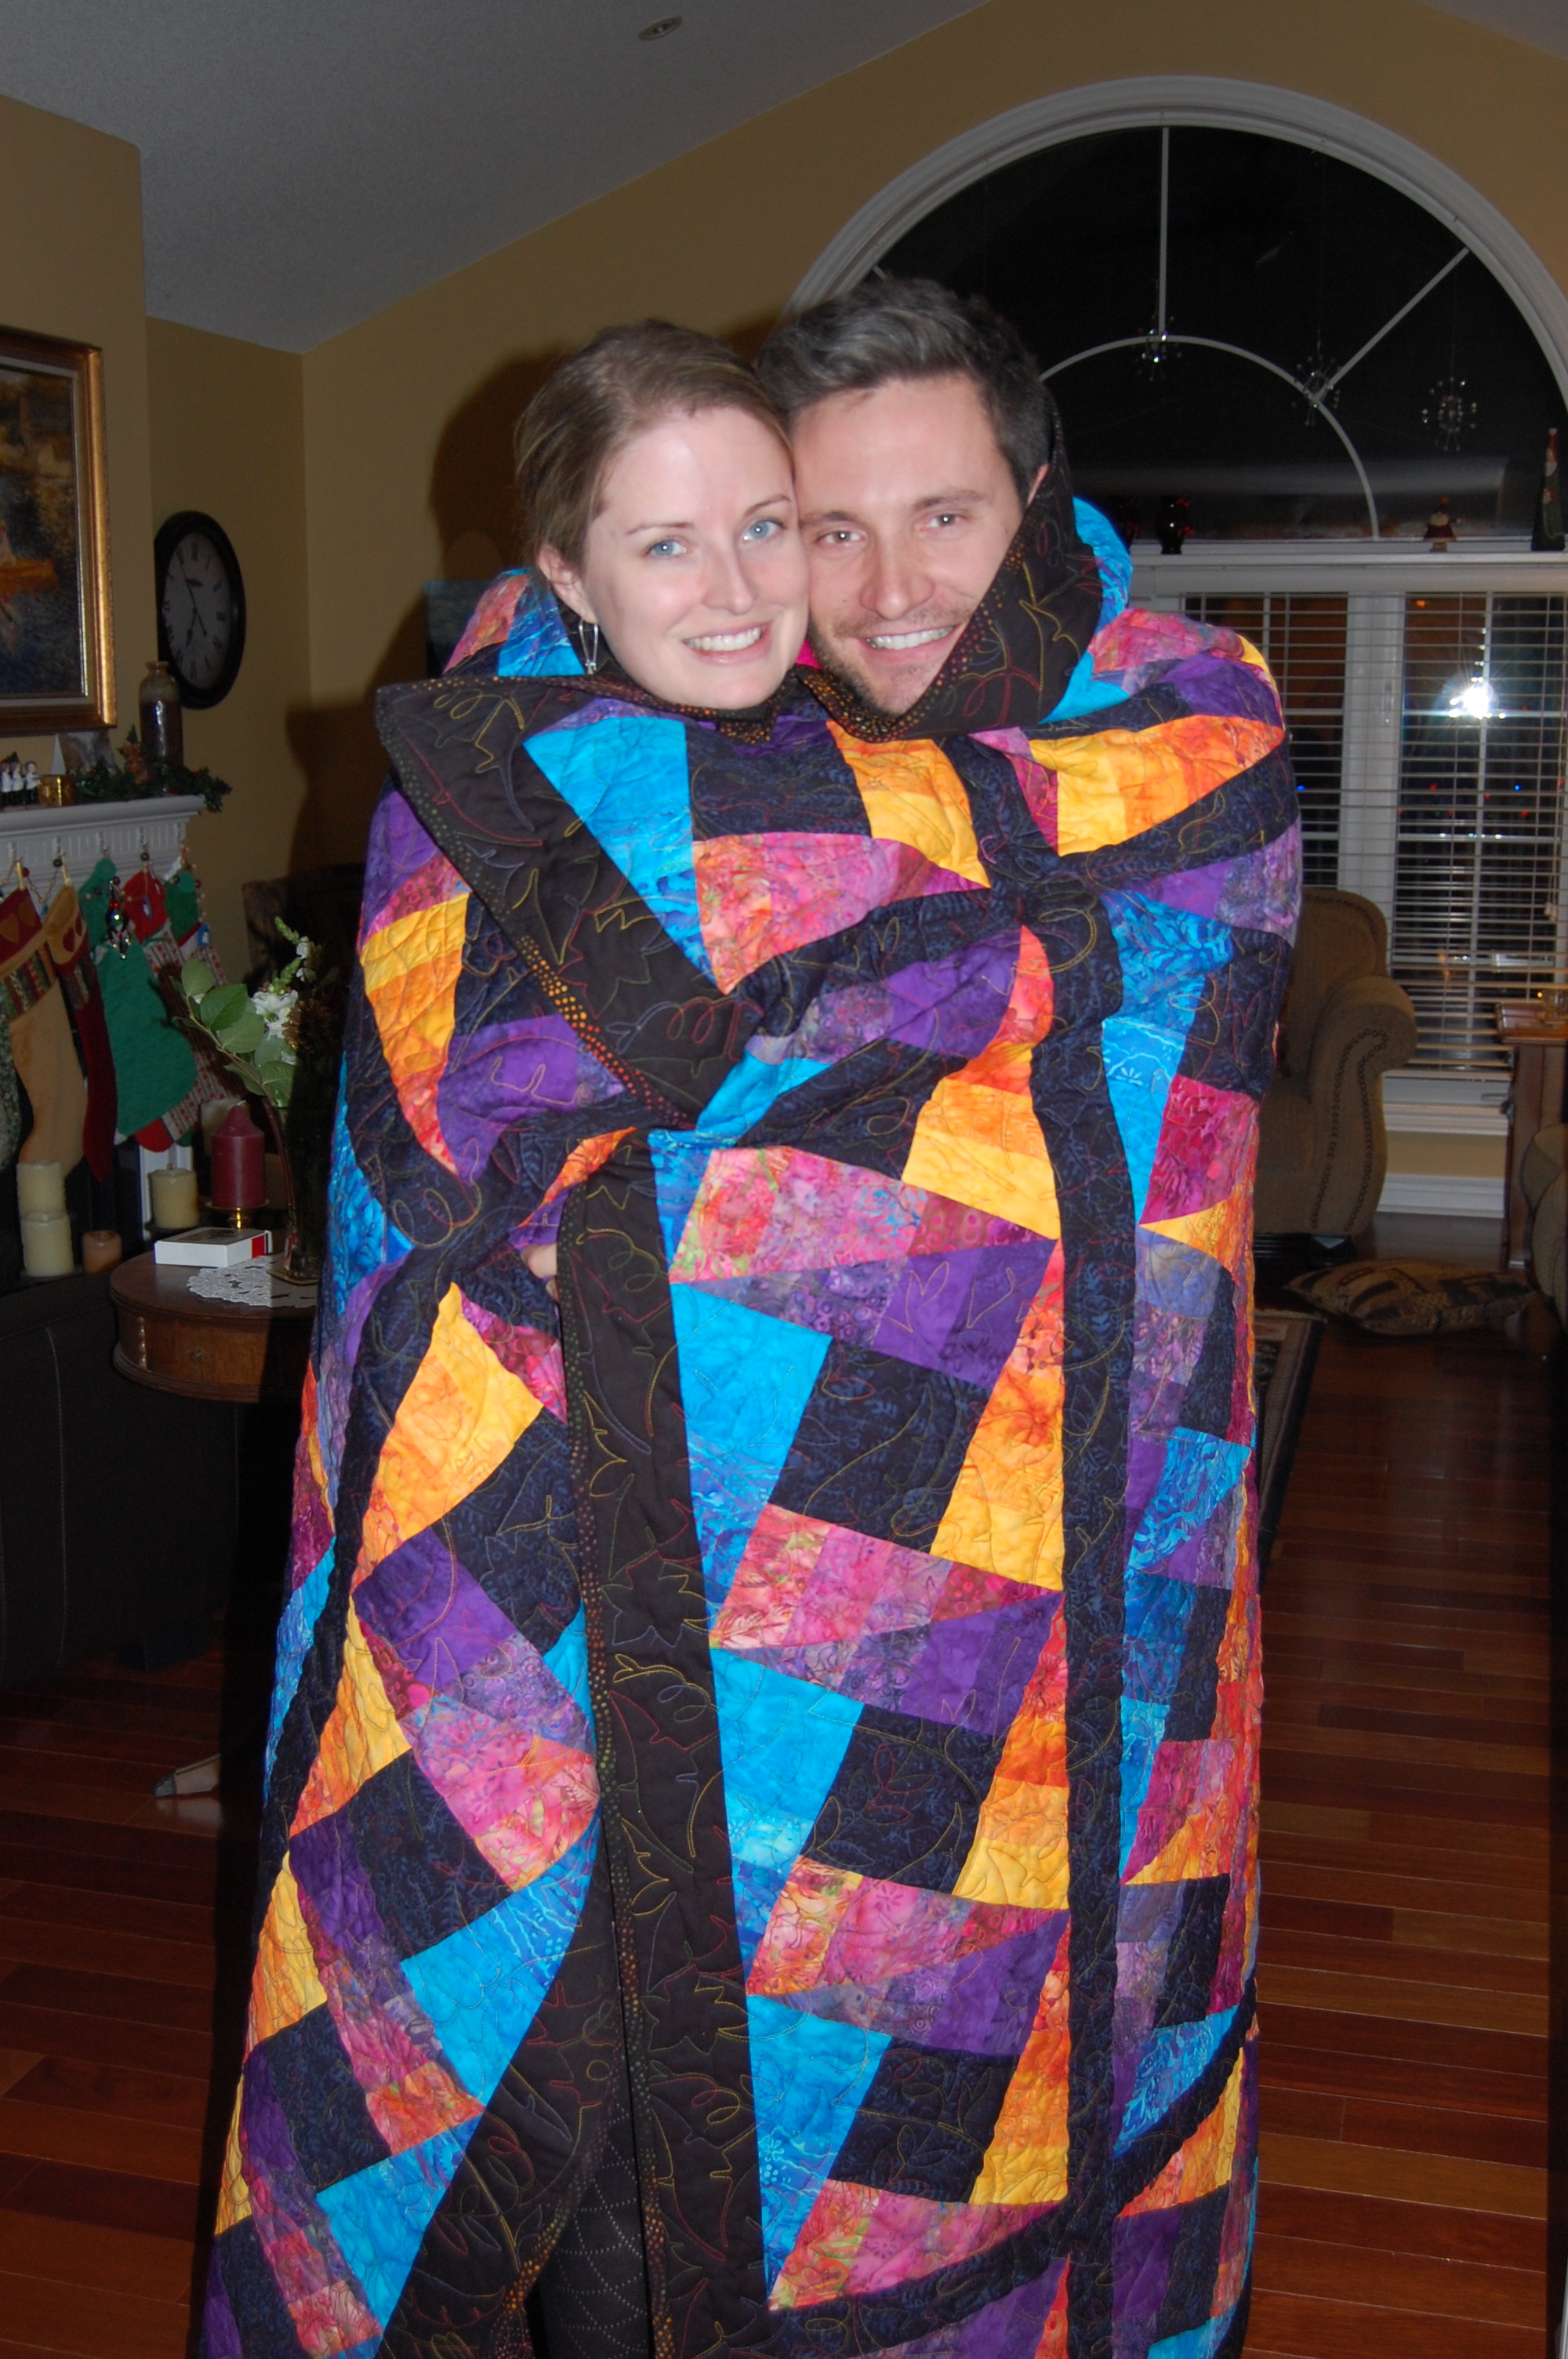 With this quilt and our love we will stay warm!